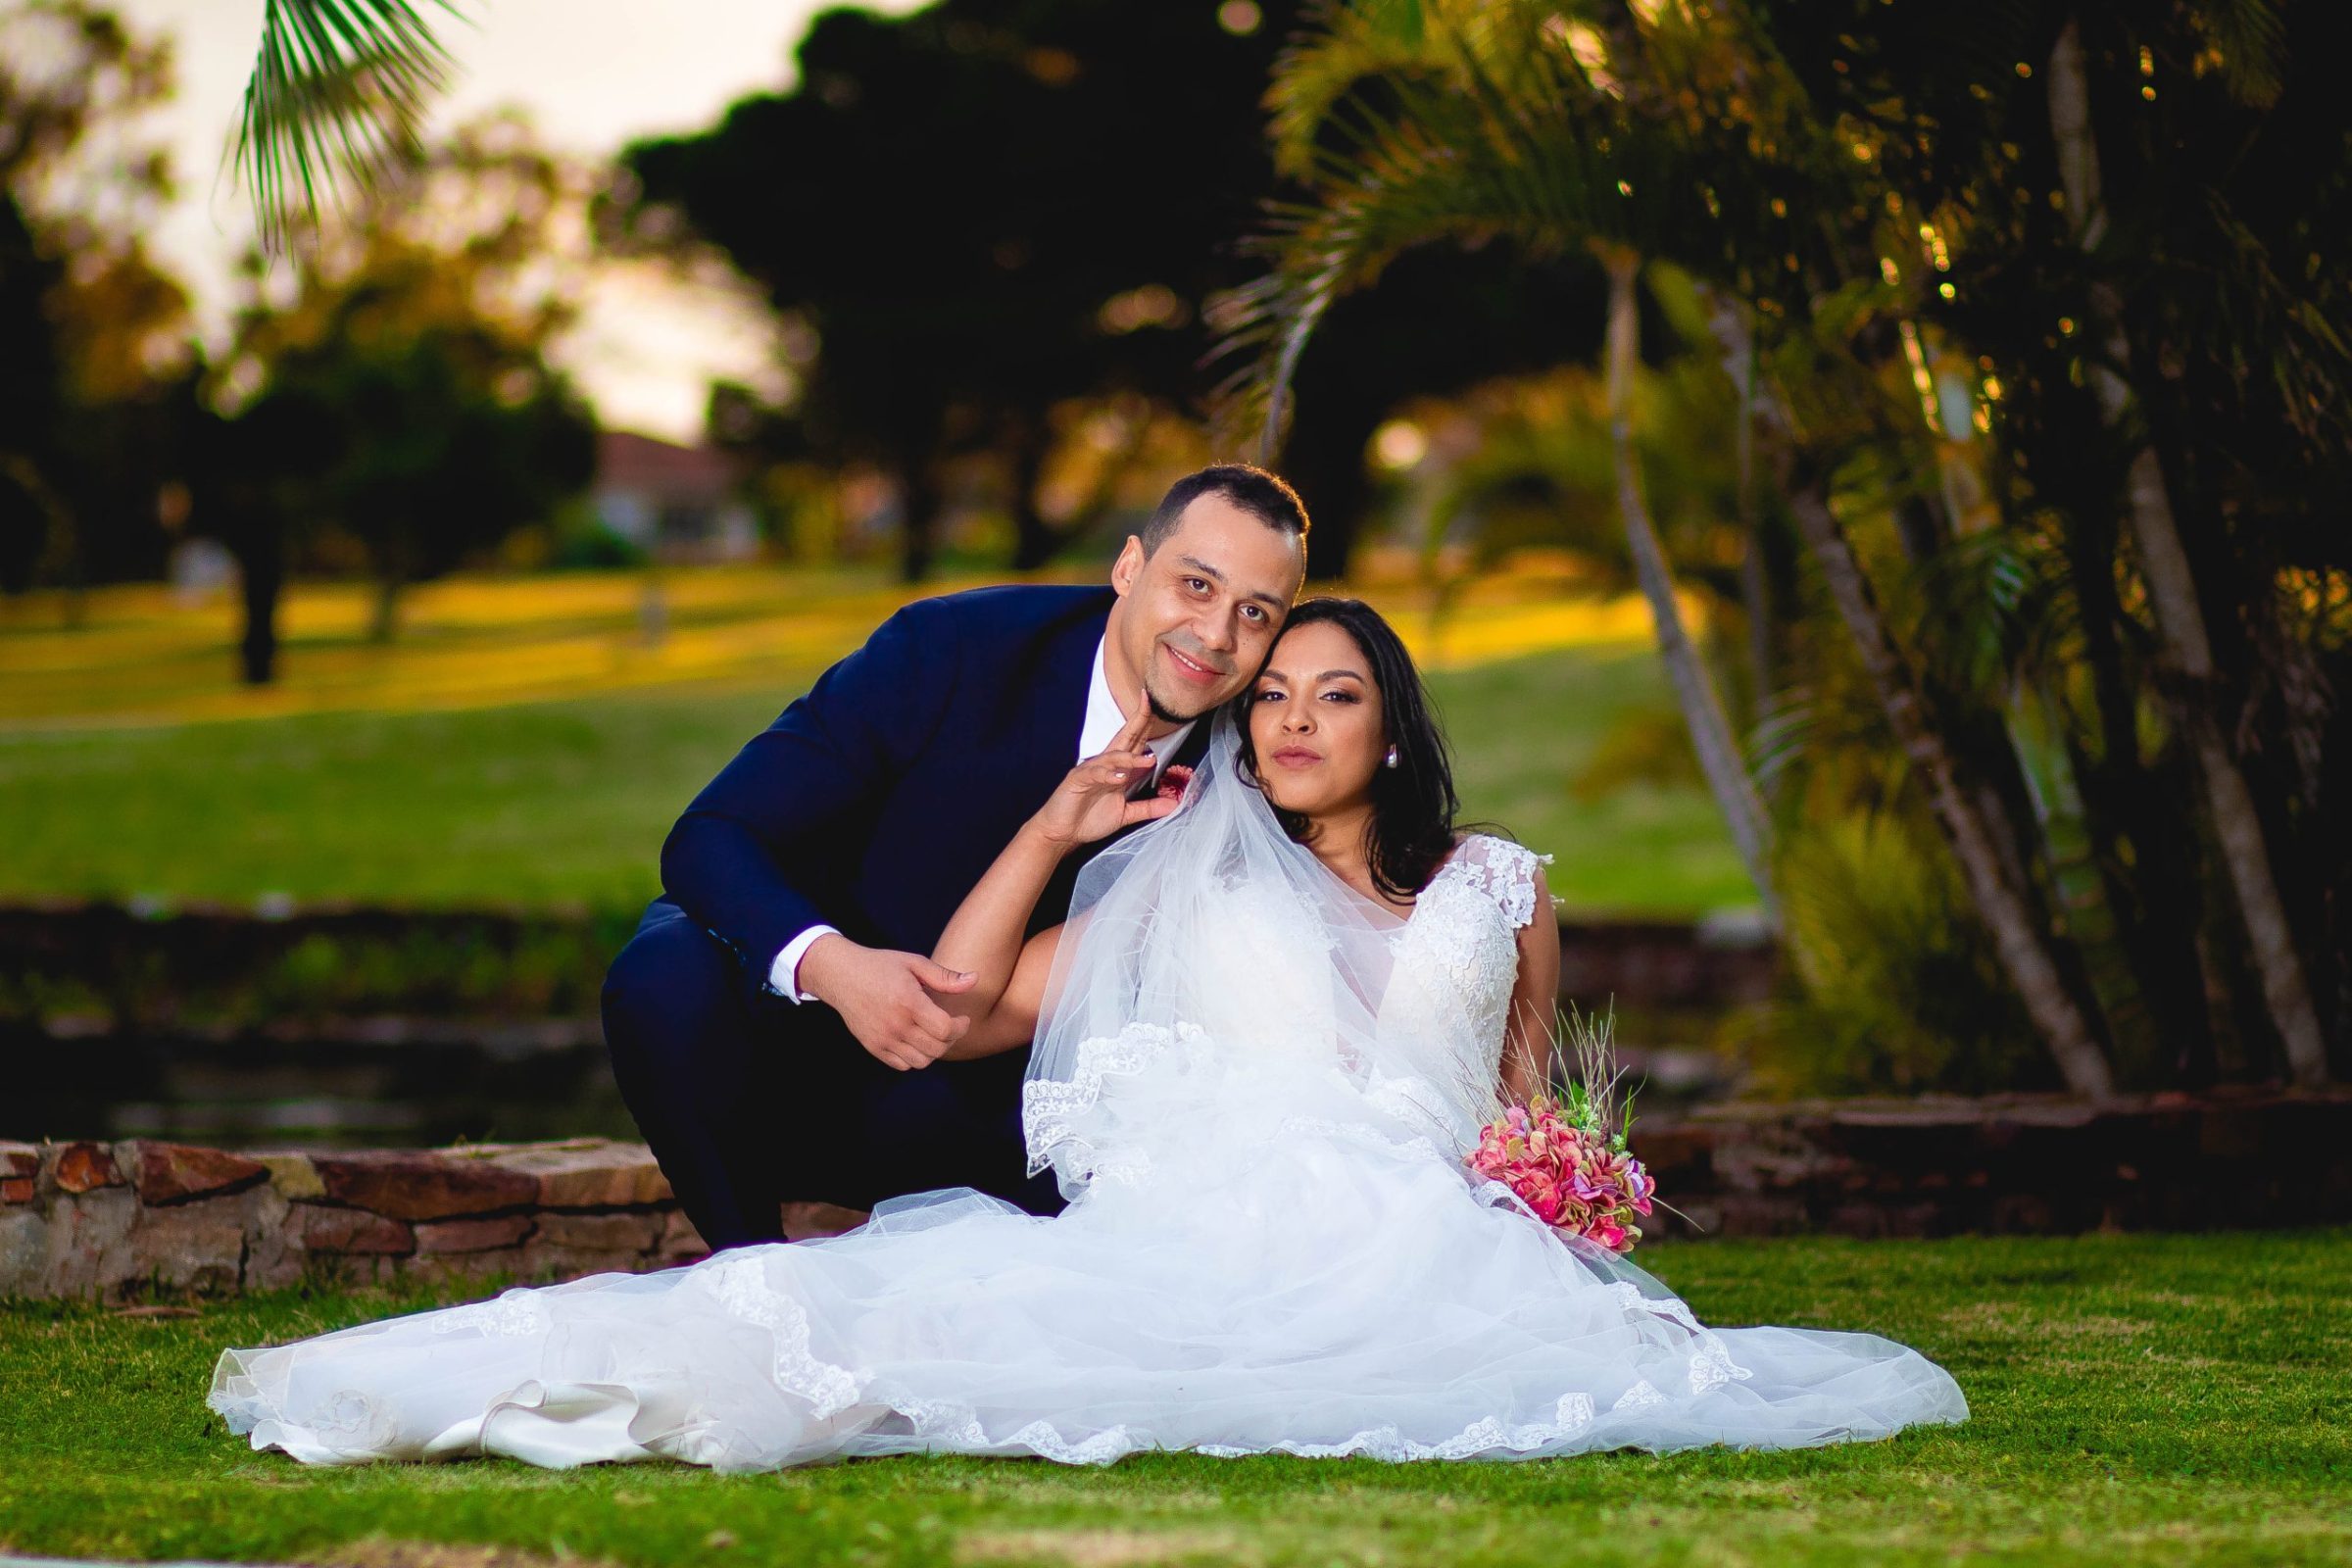 Groom and Bride sitting down on grass at a park in Port Elizabeth called Victoria Park. Photographed by Adam Hendricks of Adam Hendricks Photography.